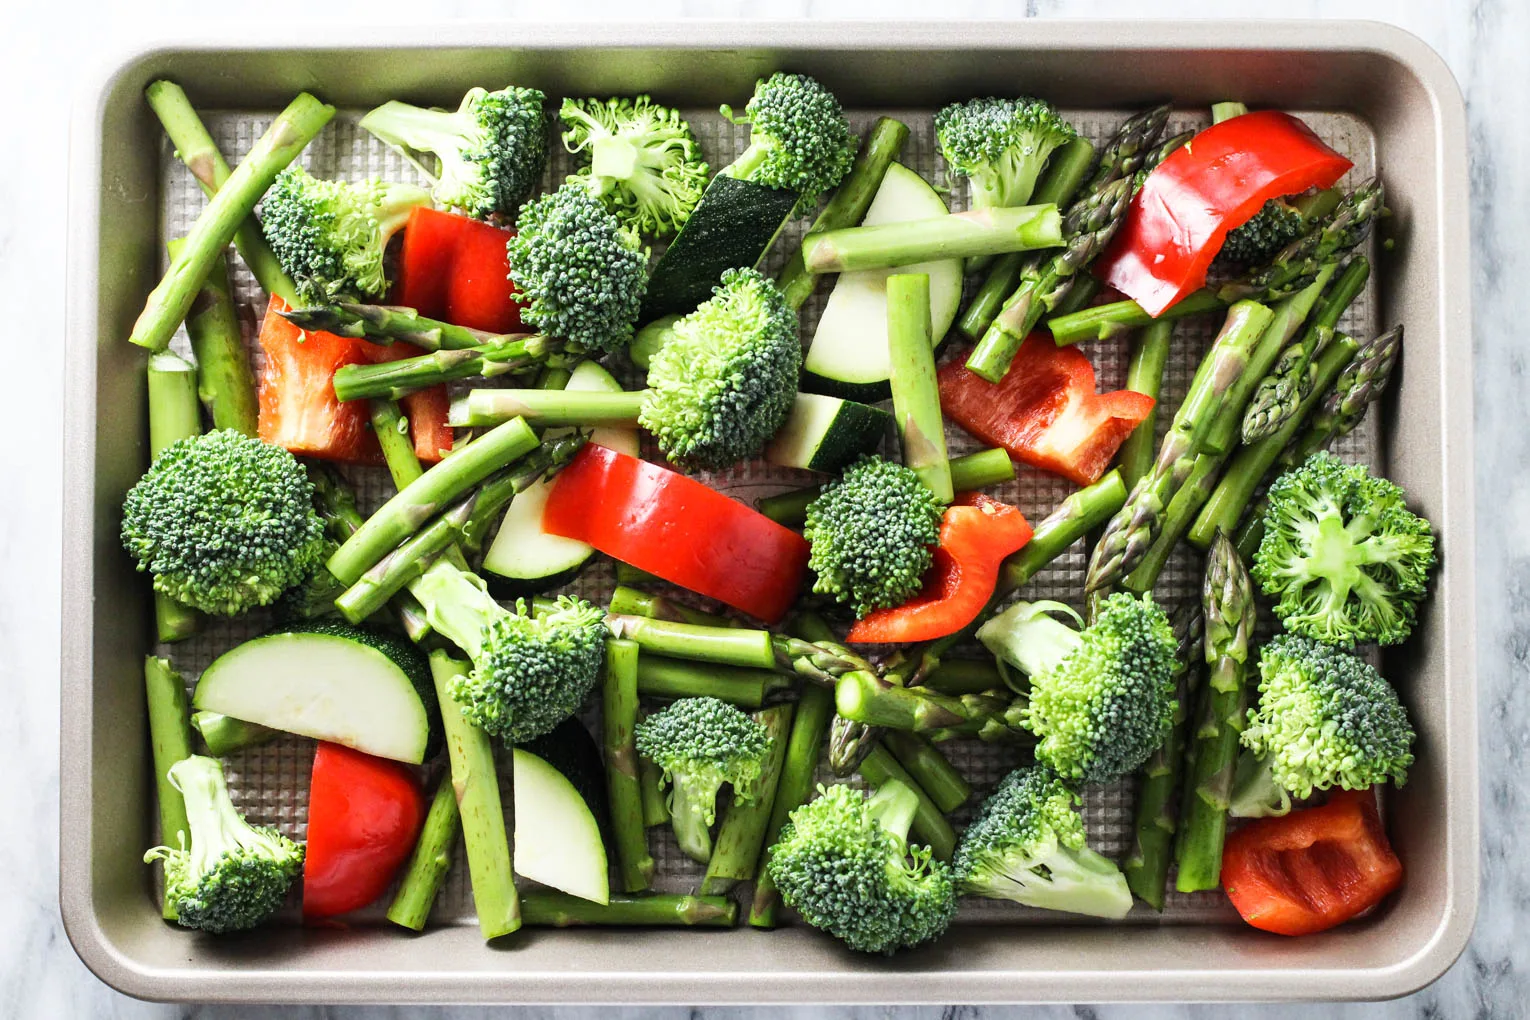 Sliced broccoli, zucchini, red bell pepper, and asparagus spread on a baking sheet. 